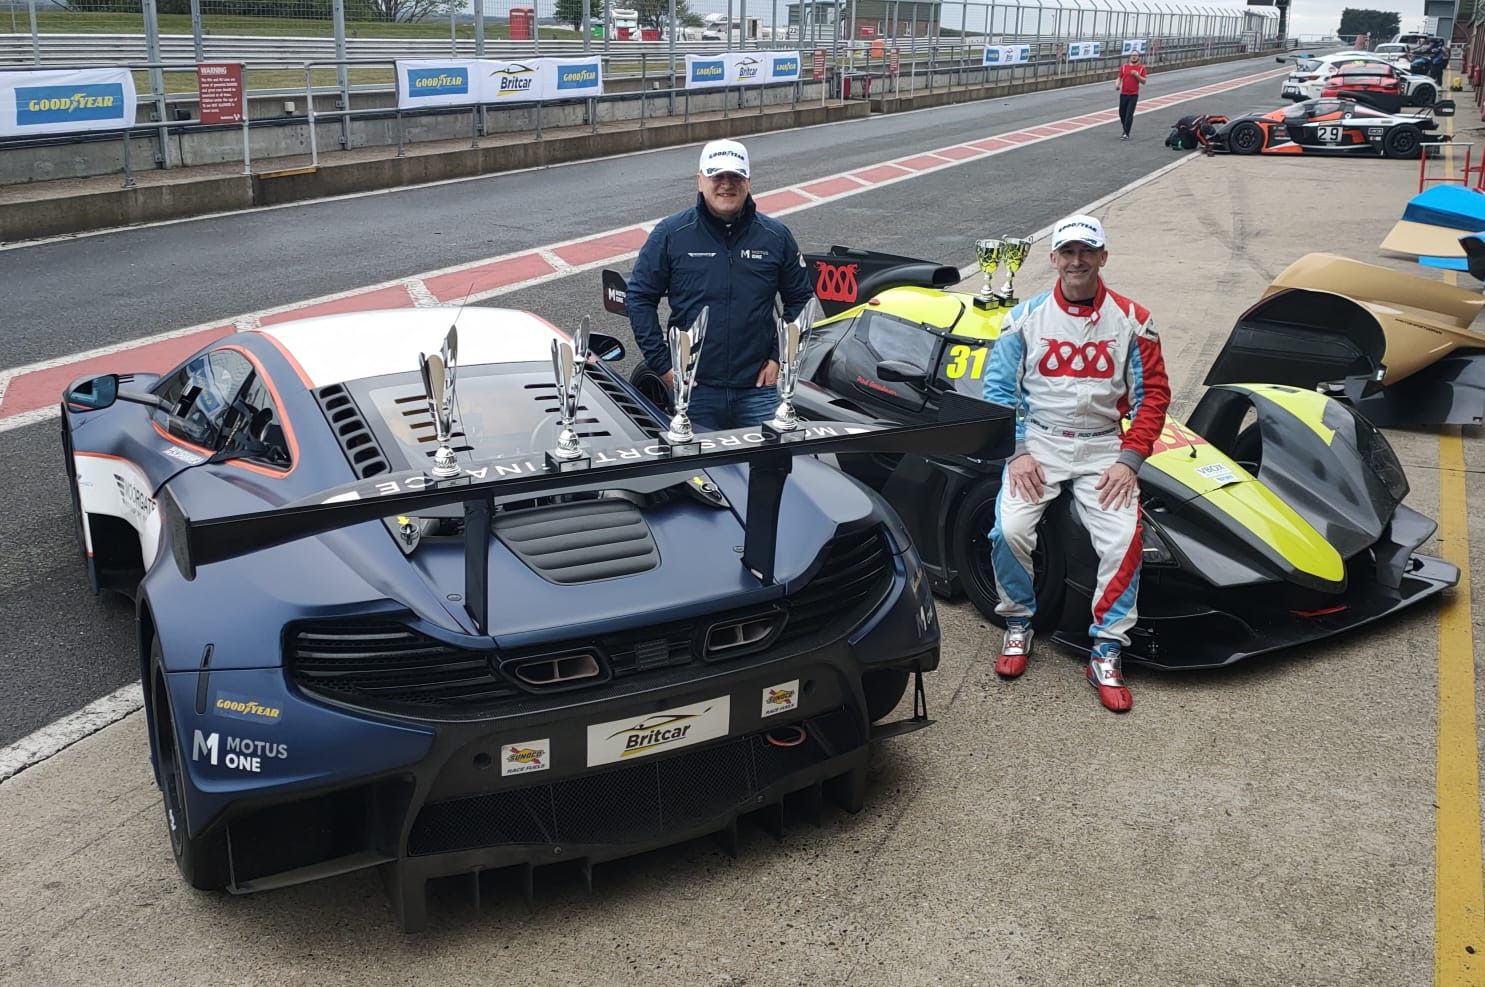 McLAREN scores two BRITCAR CLASS podiums in only their second event...